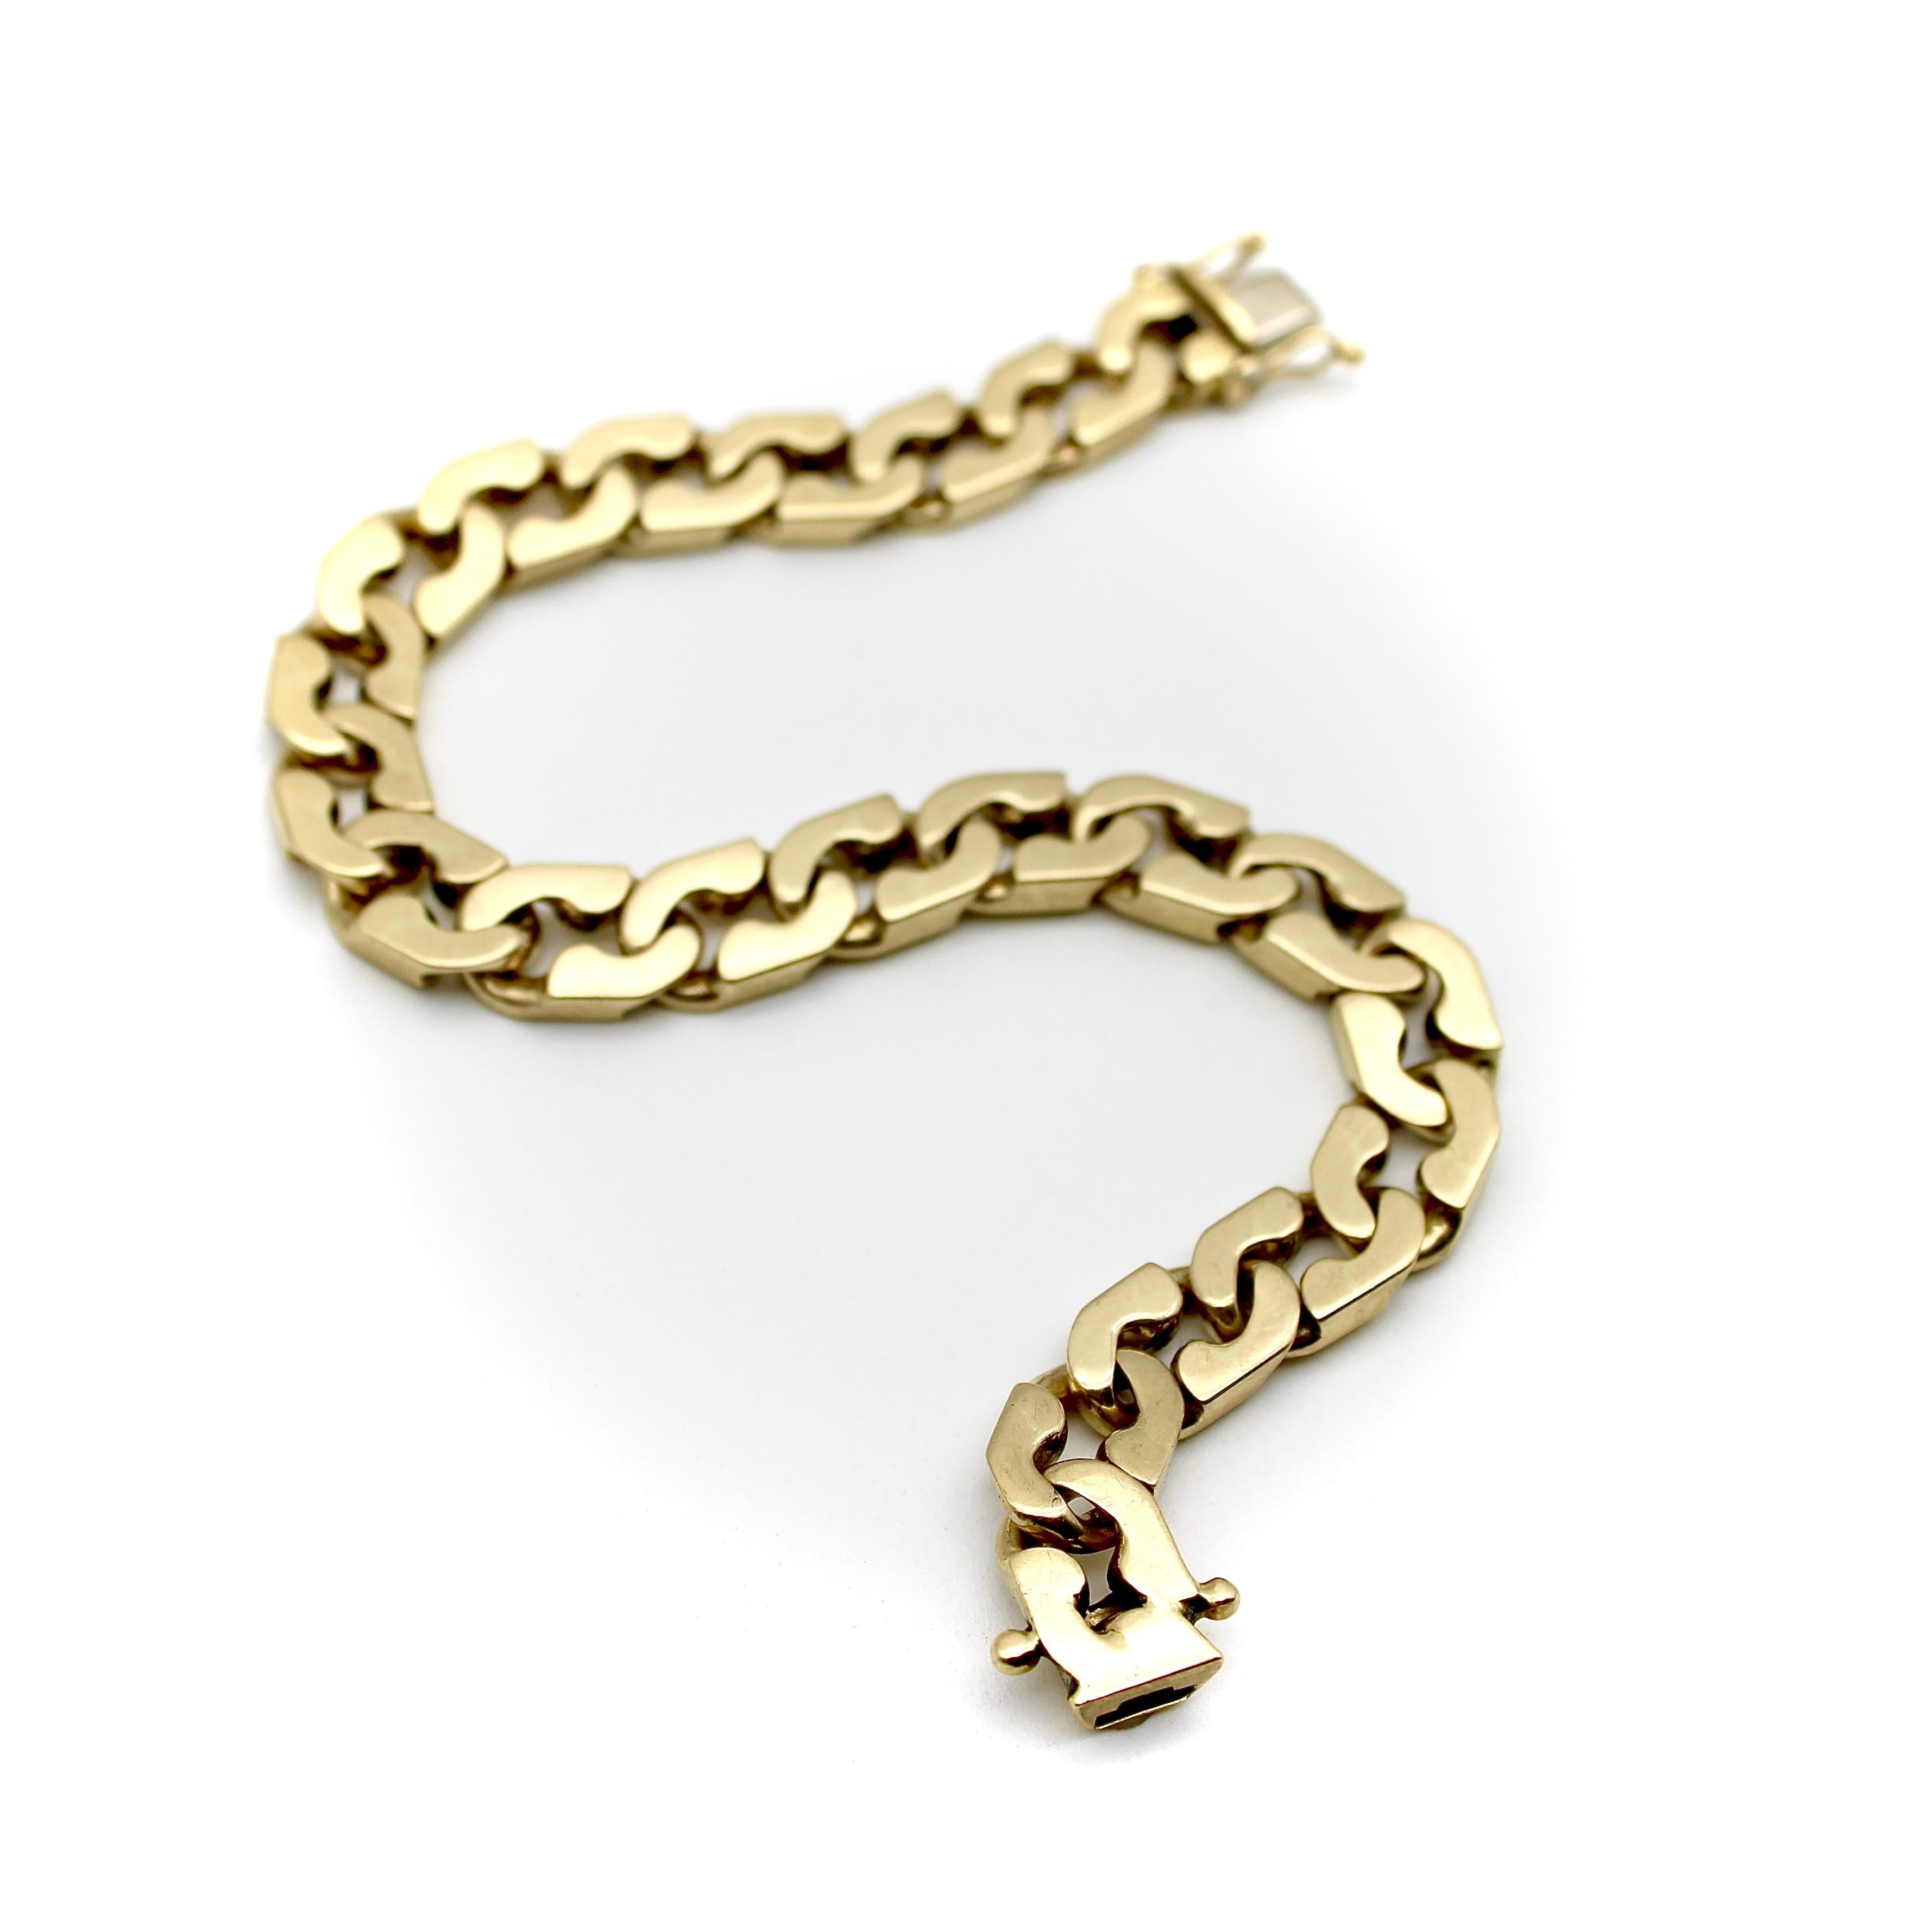 This 14k gold curb link bracelet is from Italy, circa 1980’s. It has a flattened design that gives a hard edge to the elongated curb links, allowing them to fit together like yin and yang. The links are notched so that they lie flat against the